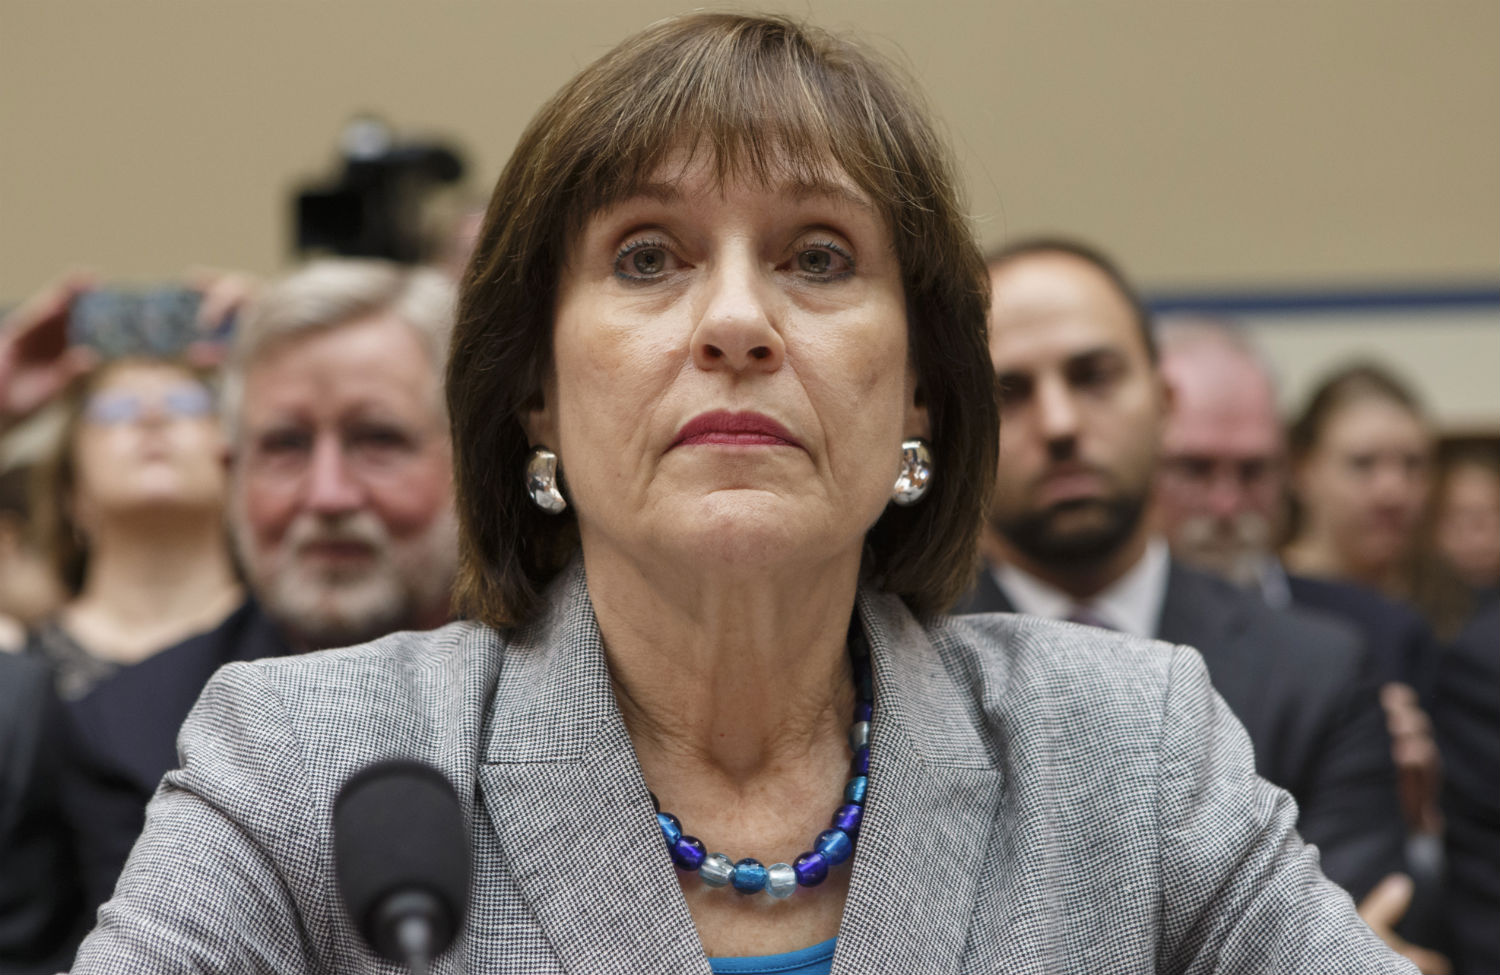 Lois Lerner’s Missing E-mails Are the Tip of the Iceberg